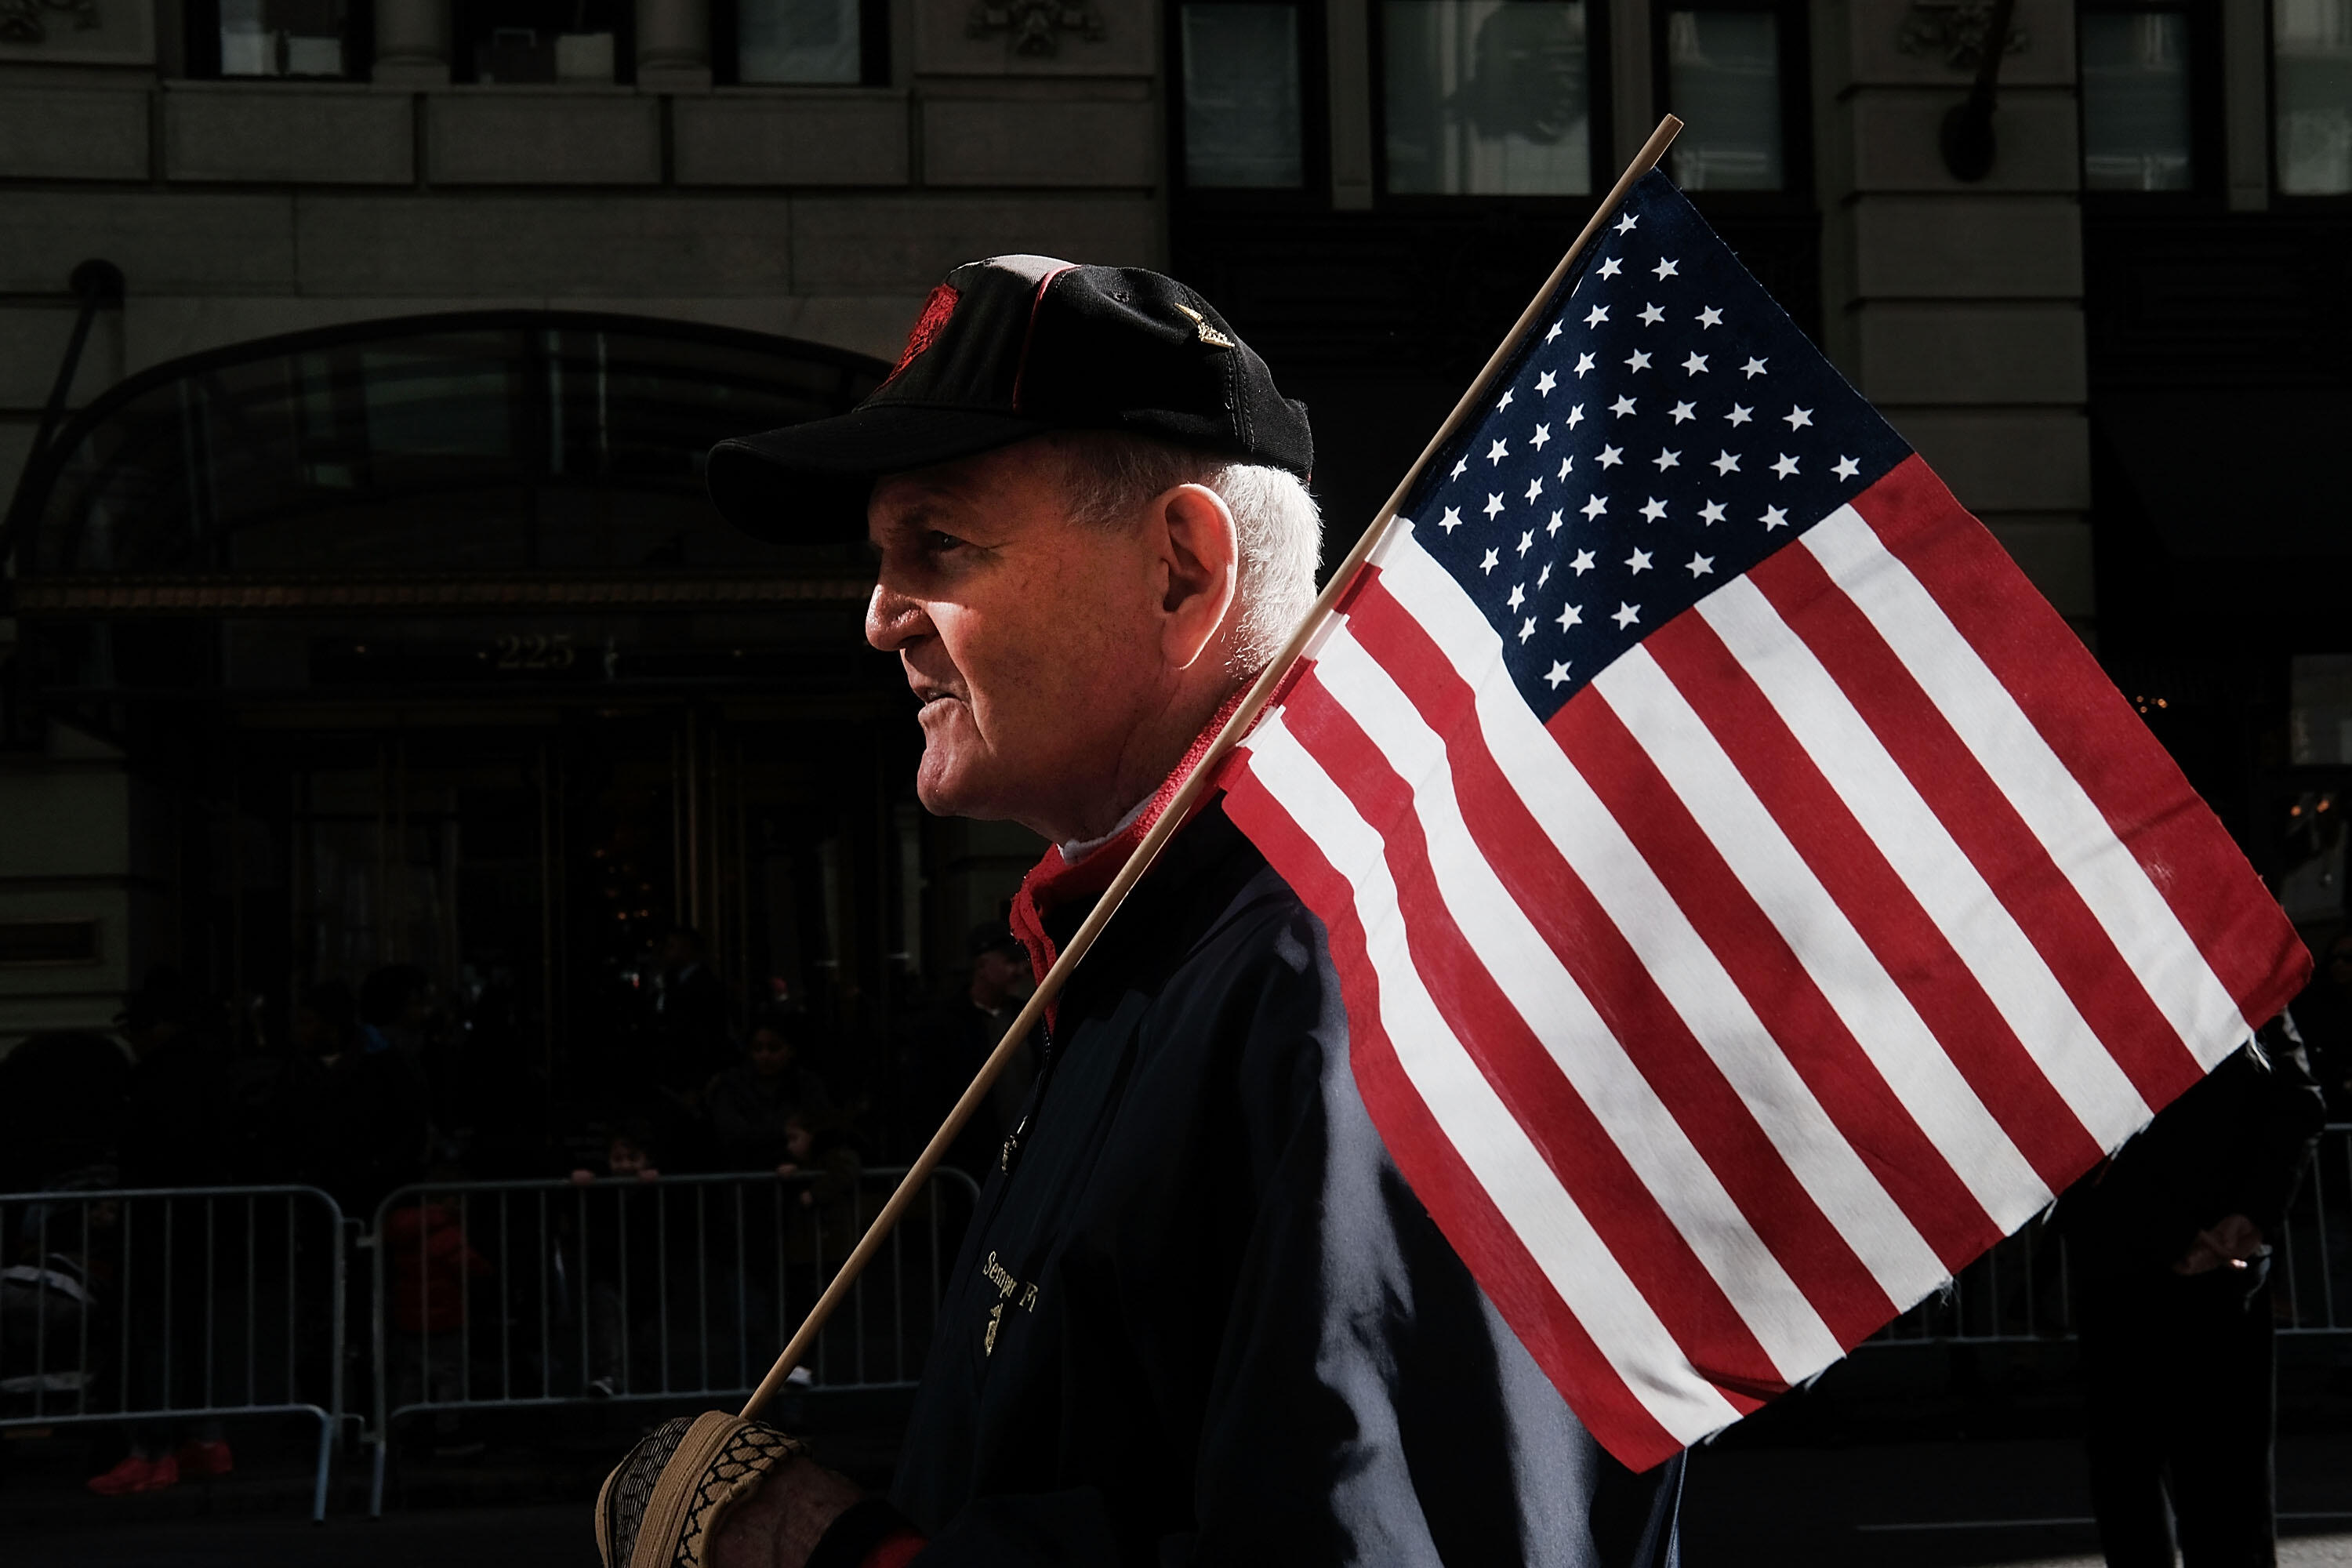 NEW YORK, NY - NOVEMBER 11:  A U.S. marine veteran marches in the nation's largest Veterans Day Parade in New York City on November 11, 2016 in New York City. Known as 'America's Parade' it features over 20,000 participants, including veterans of numerous